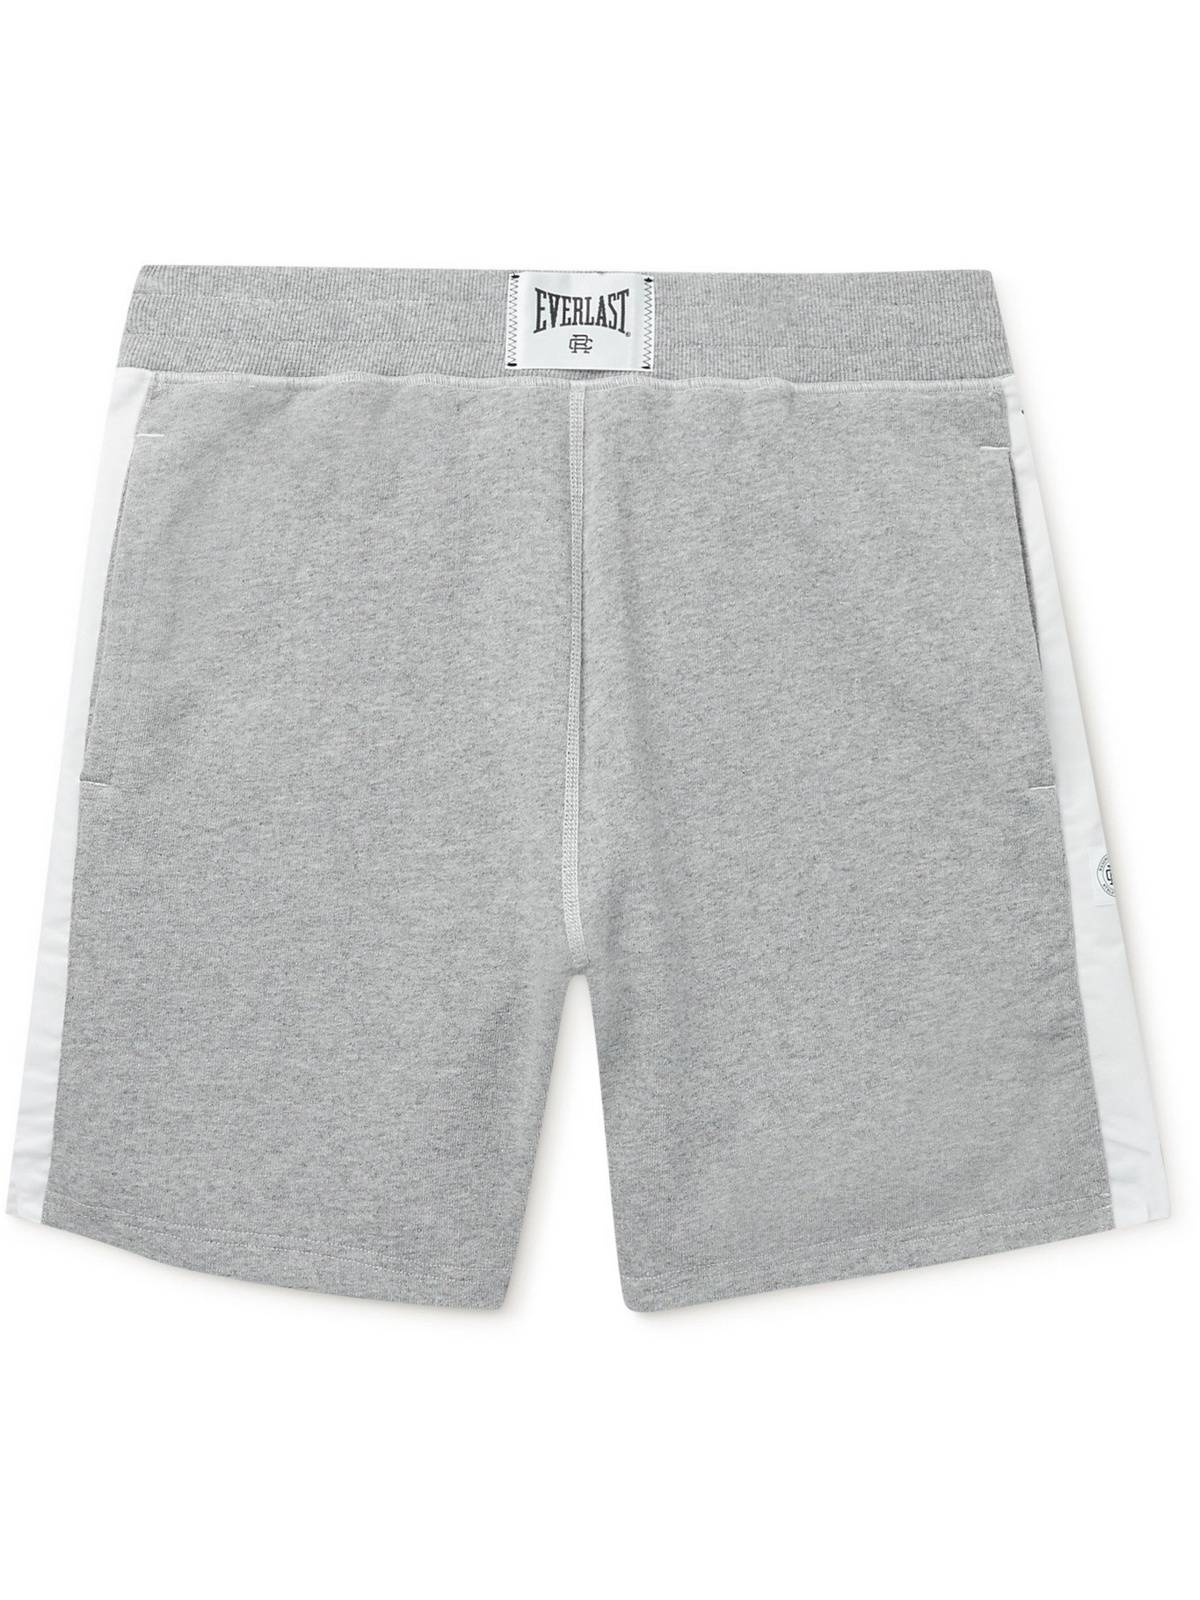 REIGNING CHAMP - Everlast Wide-Leg Striped Loopback Cotton-Blend Jersey  Shorts - Gray - L Reigning Champ